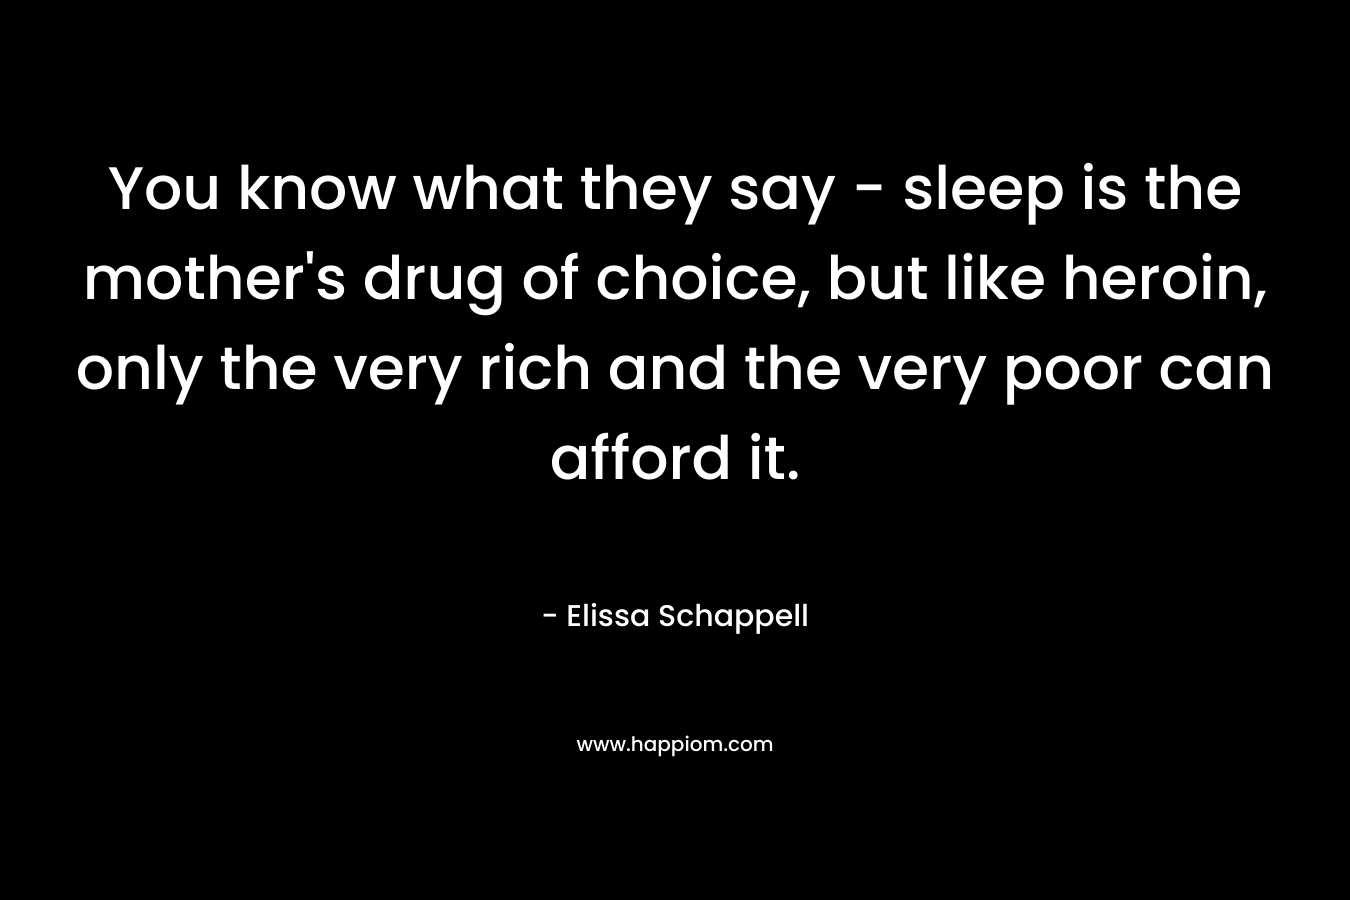 You know what they say – sleep is the mother’s drug of choice, but like heroin, only the very rich and the very poor can afford it. – Elissa Schappell